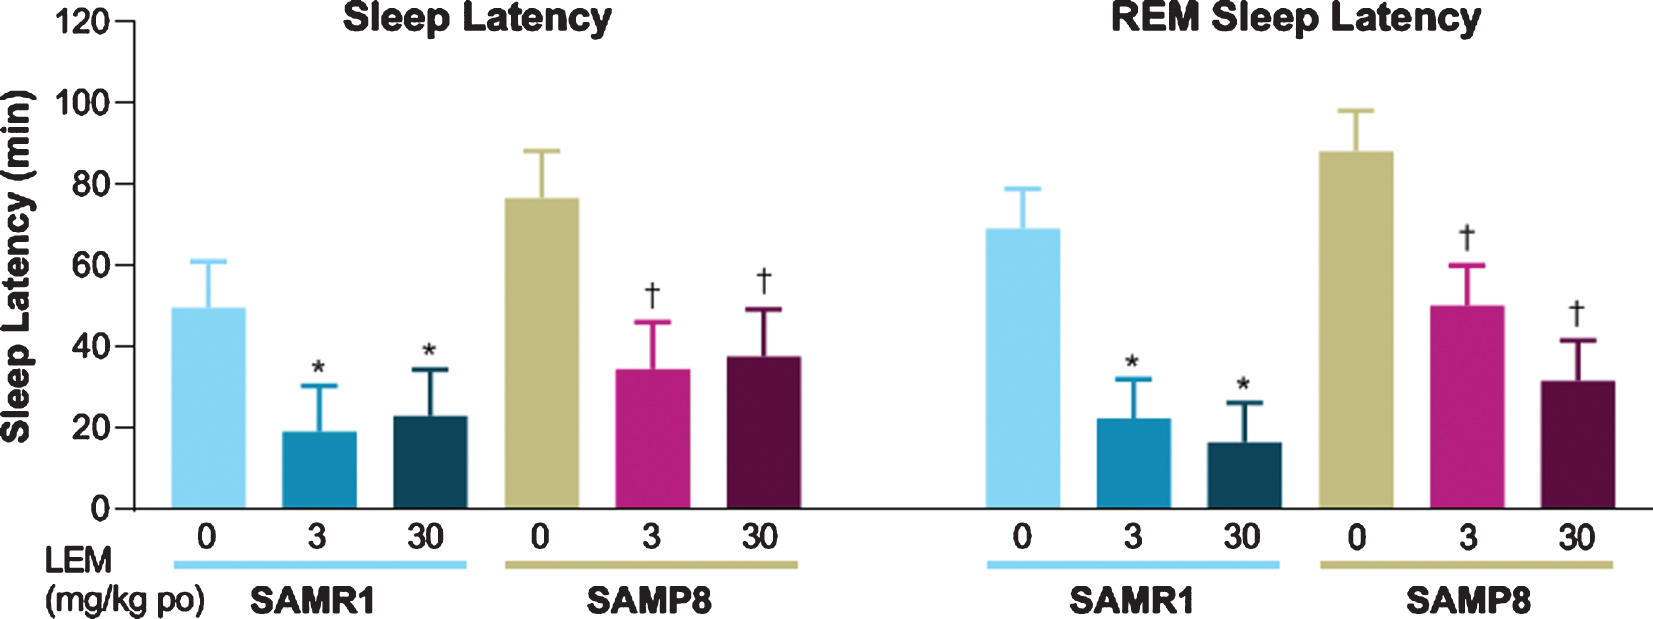 Effect of lemborexant (LEM) on sleep latency and rapid eye movement (REM) sleep latency in senescence-accelerated mouse resistant-1 (SAMR1) and senescence-accelerated mouse prone-8 (SAMP8) mice. In a randomized crossover design, mice (n = 8 per strain, per treatment) received single oral (po) doses of vehicle, LEM 3 mg/kg, and LEM 30 mg/kg at Zeitgeber time 0:00–0:30. Data are mean±standard error of the mean. *p < 0.05 versus SAMR1 vehicle. †p < 0.05 versus SAMP8 vehicle. Statistical analyses were performed using linear mixed-model analysis (with treatment as fixed effects and animal as a random effect), followed by Dunnett type multiple comparison test in each strain.